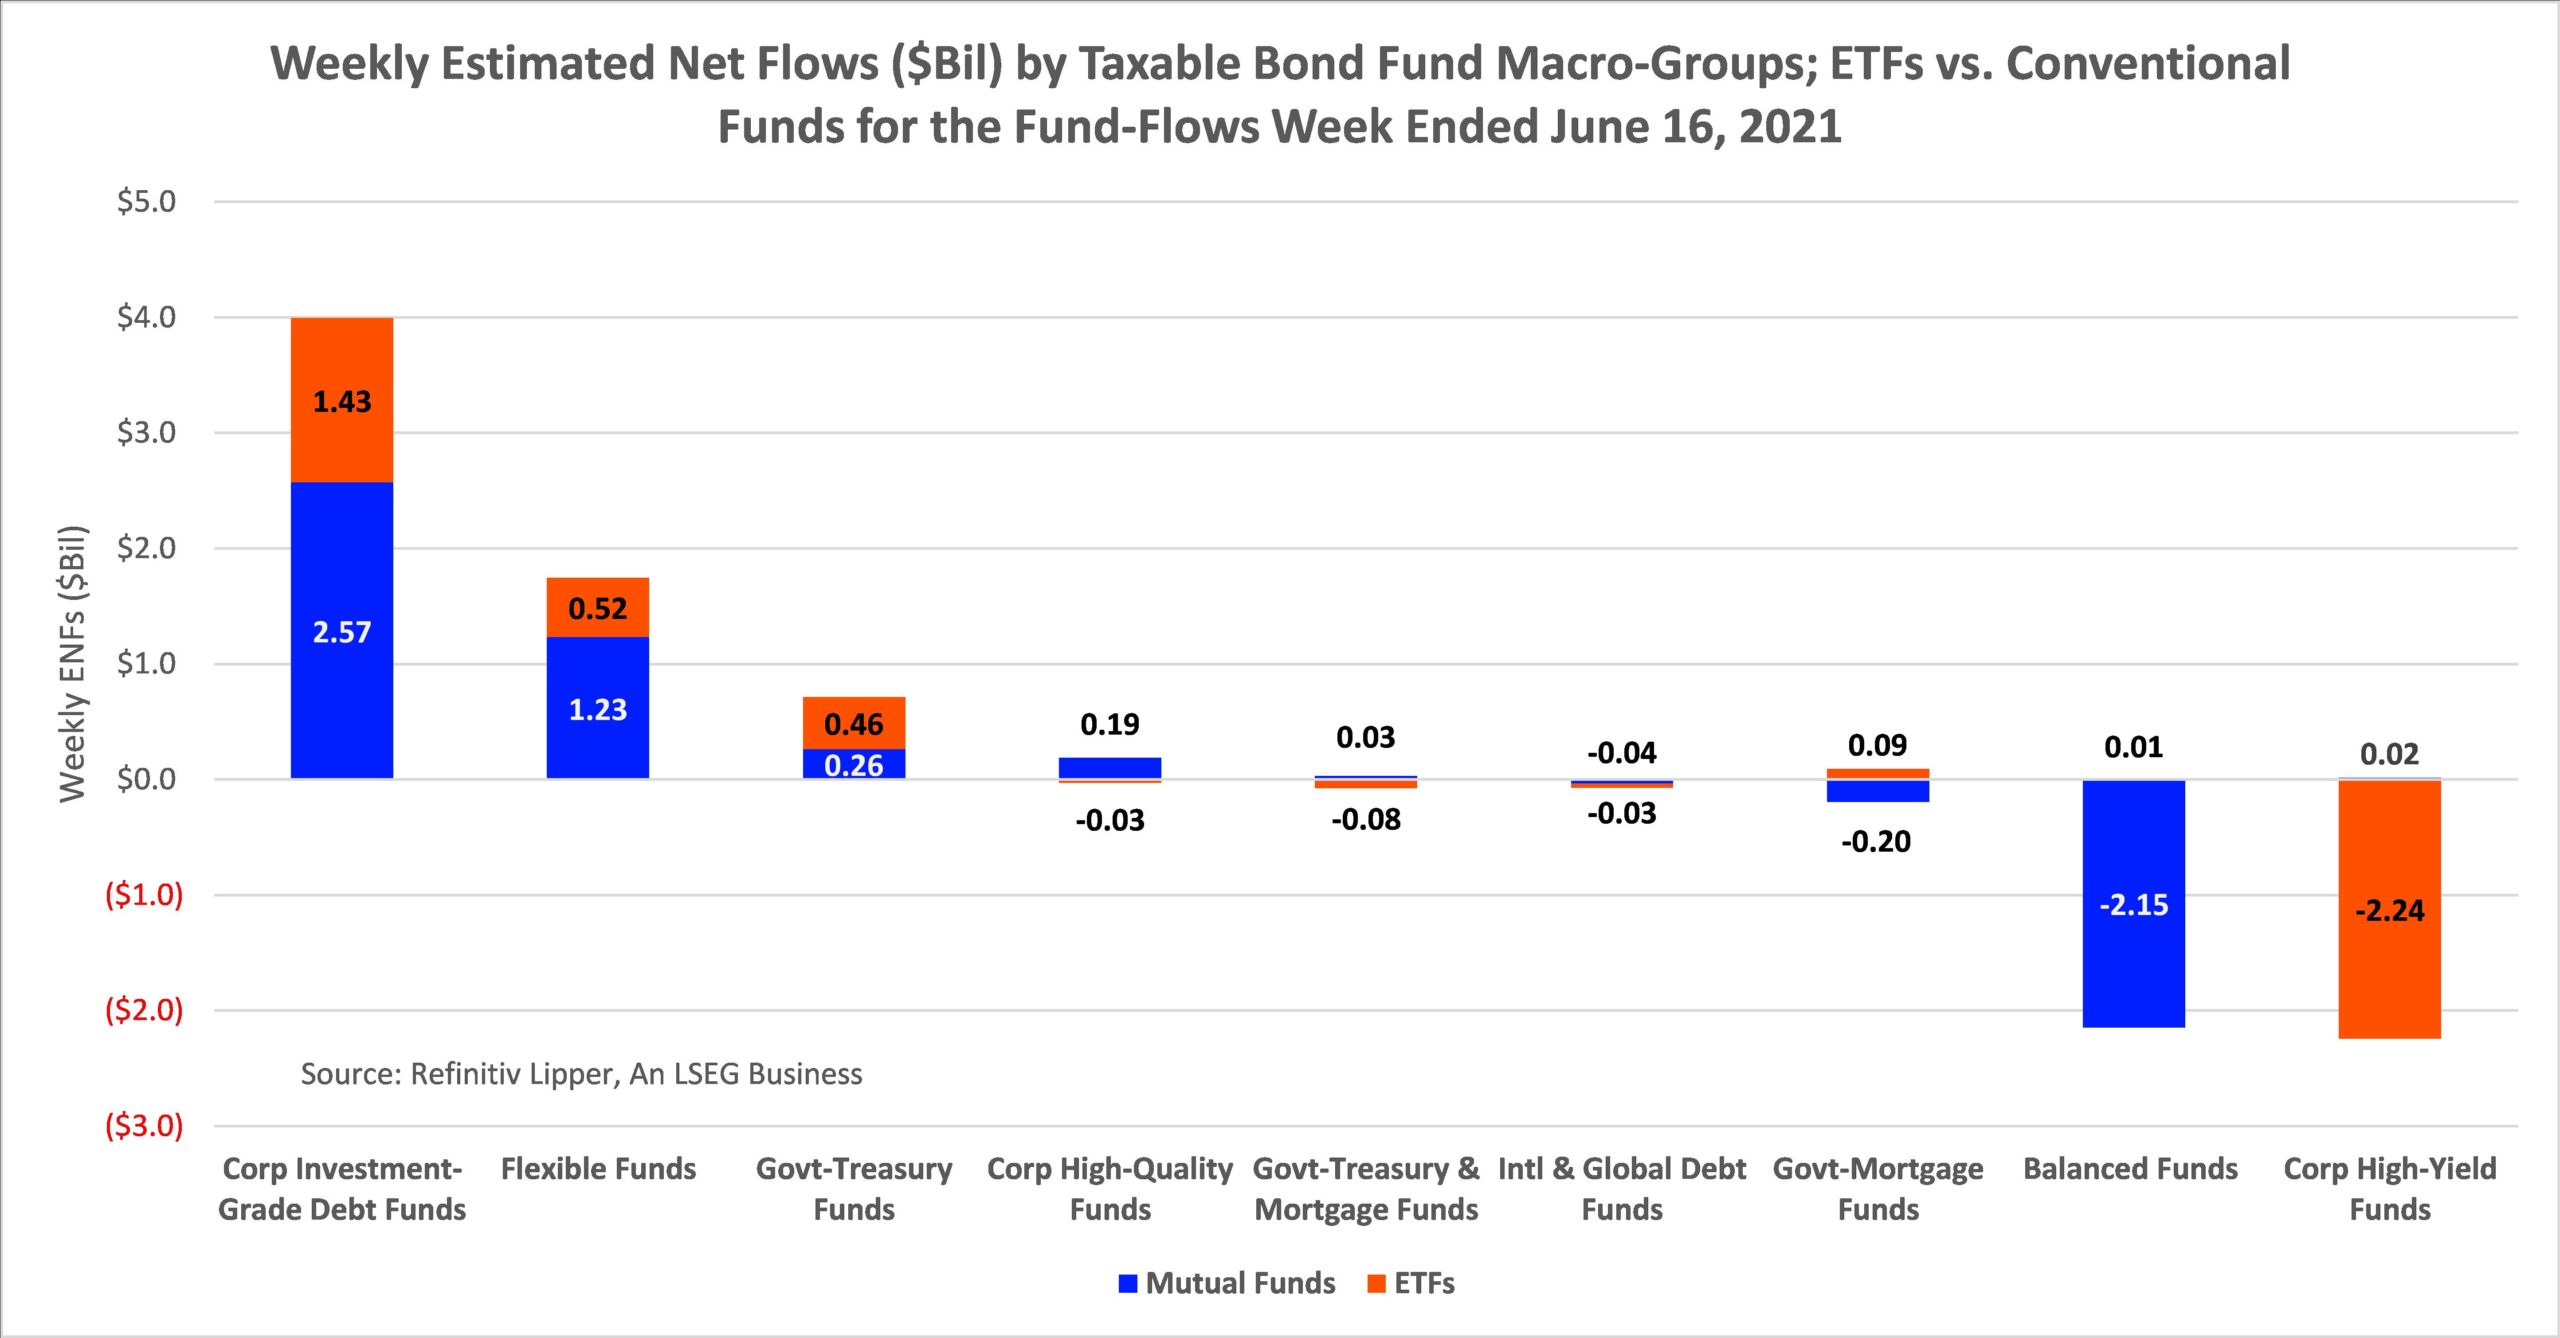 Weely ENFs Taxable Bond Funds by Macro Group ETF vs Funds